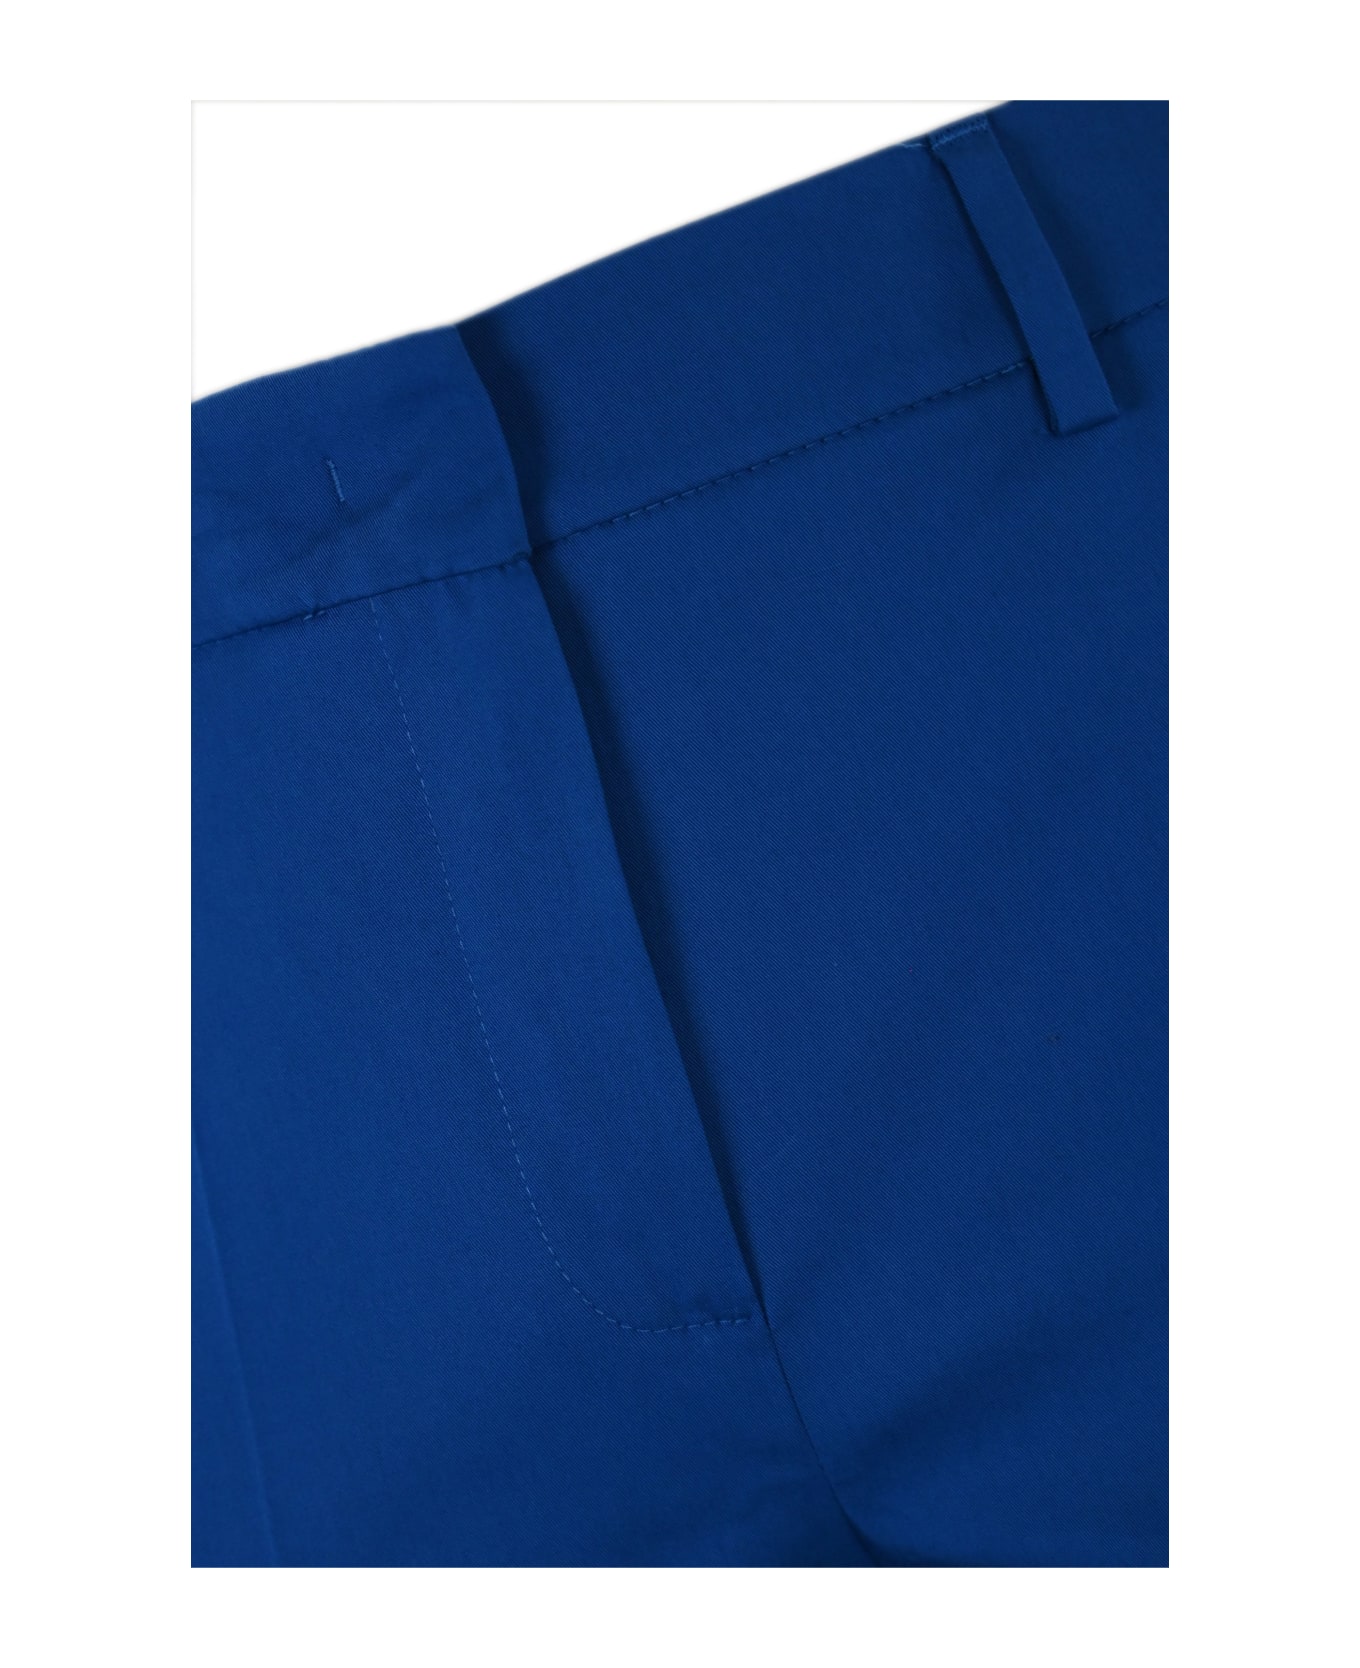 Weekend Max Mara 'cecco' Stretch Cotton Trousers - Oltremare ボトムス